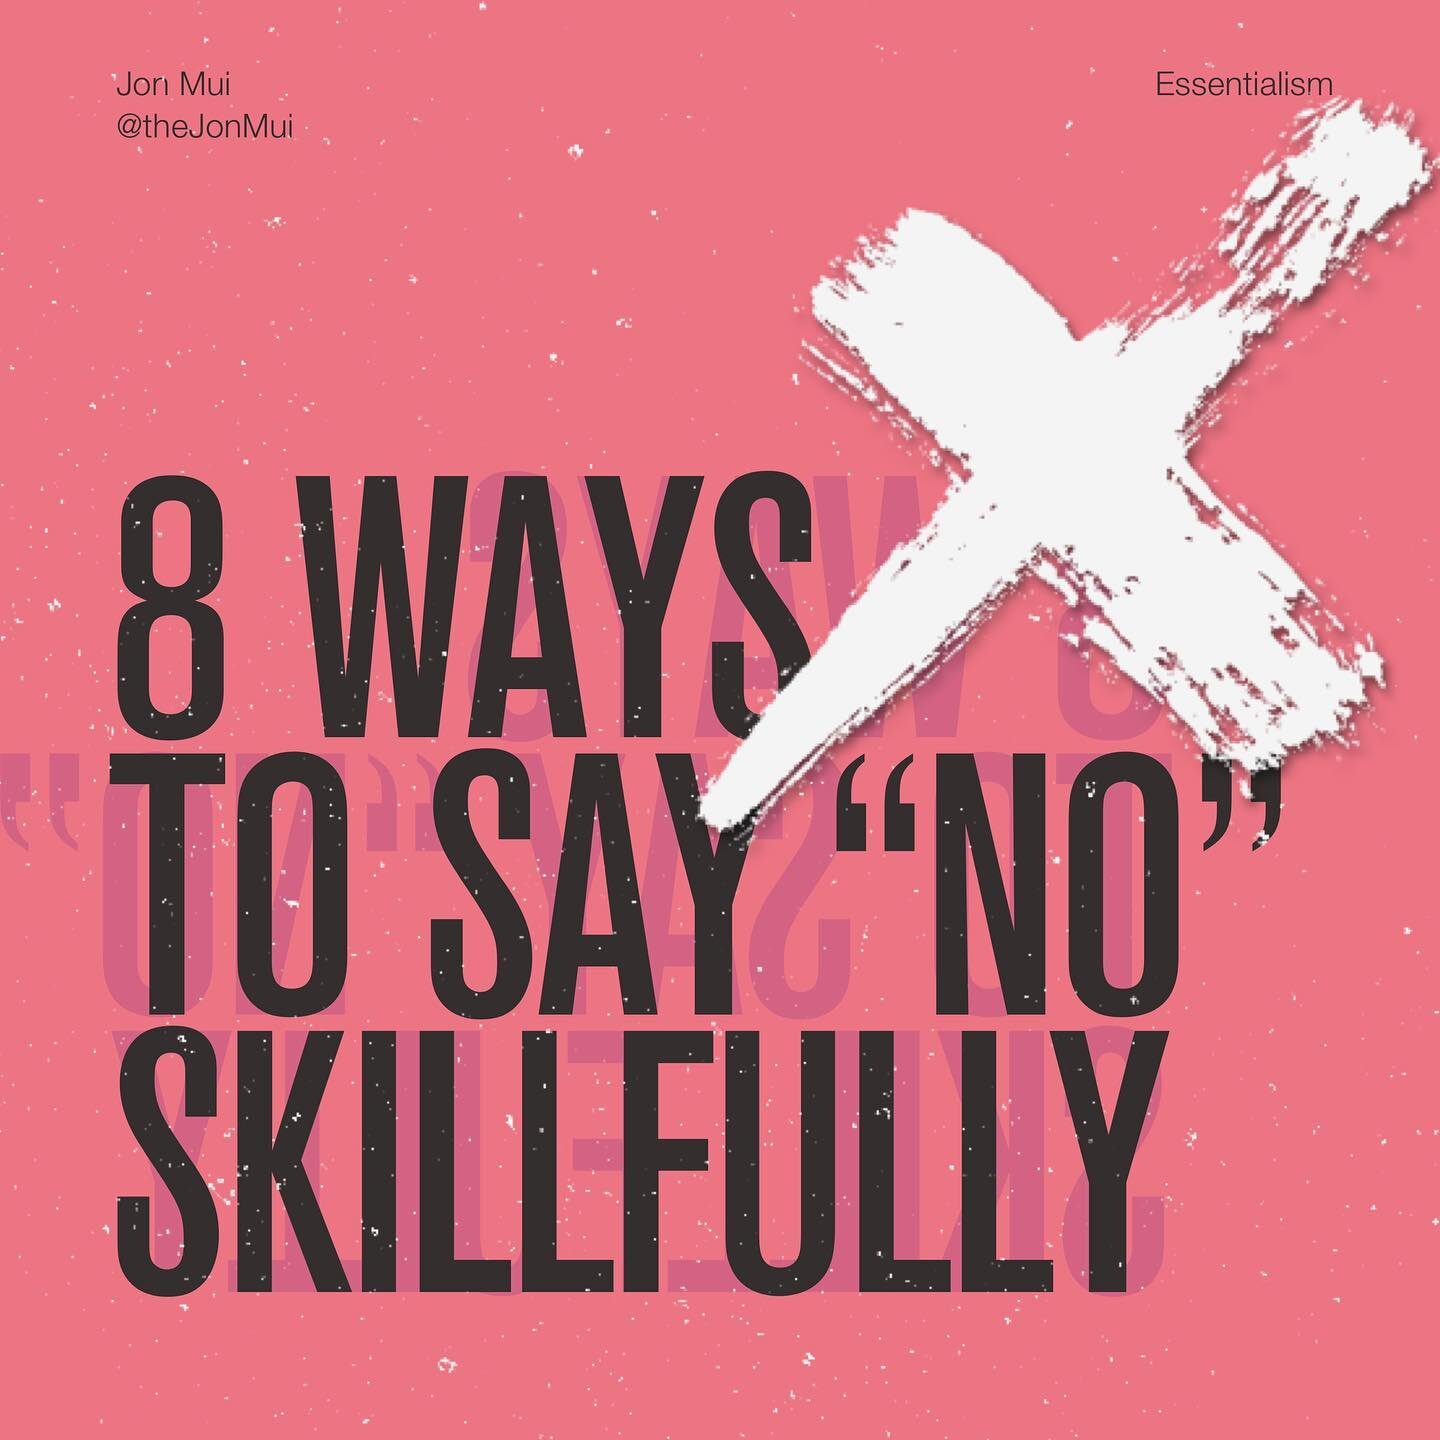 By far the most powerful productivity tool ⁣
⁣
we possess is our ability to say &quot;no&quot; to others.⁣
⁣
To do it with grace and poise is another story.⁣
⁣
As Greg McKeown points out, here is a skill ⁣
⁣
we can all get a lifetime of benefit from 